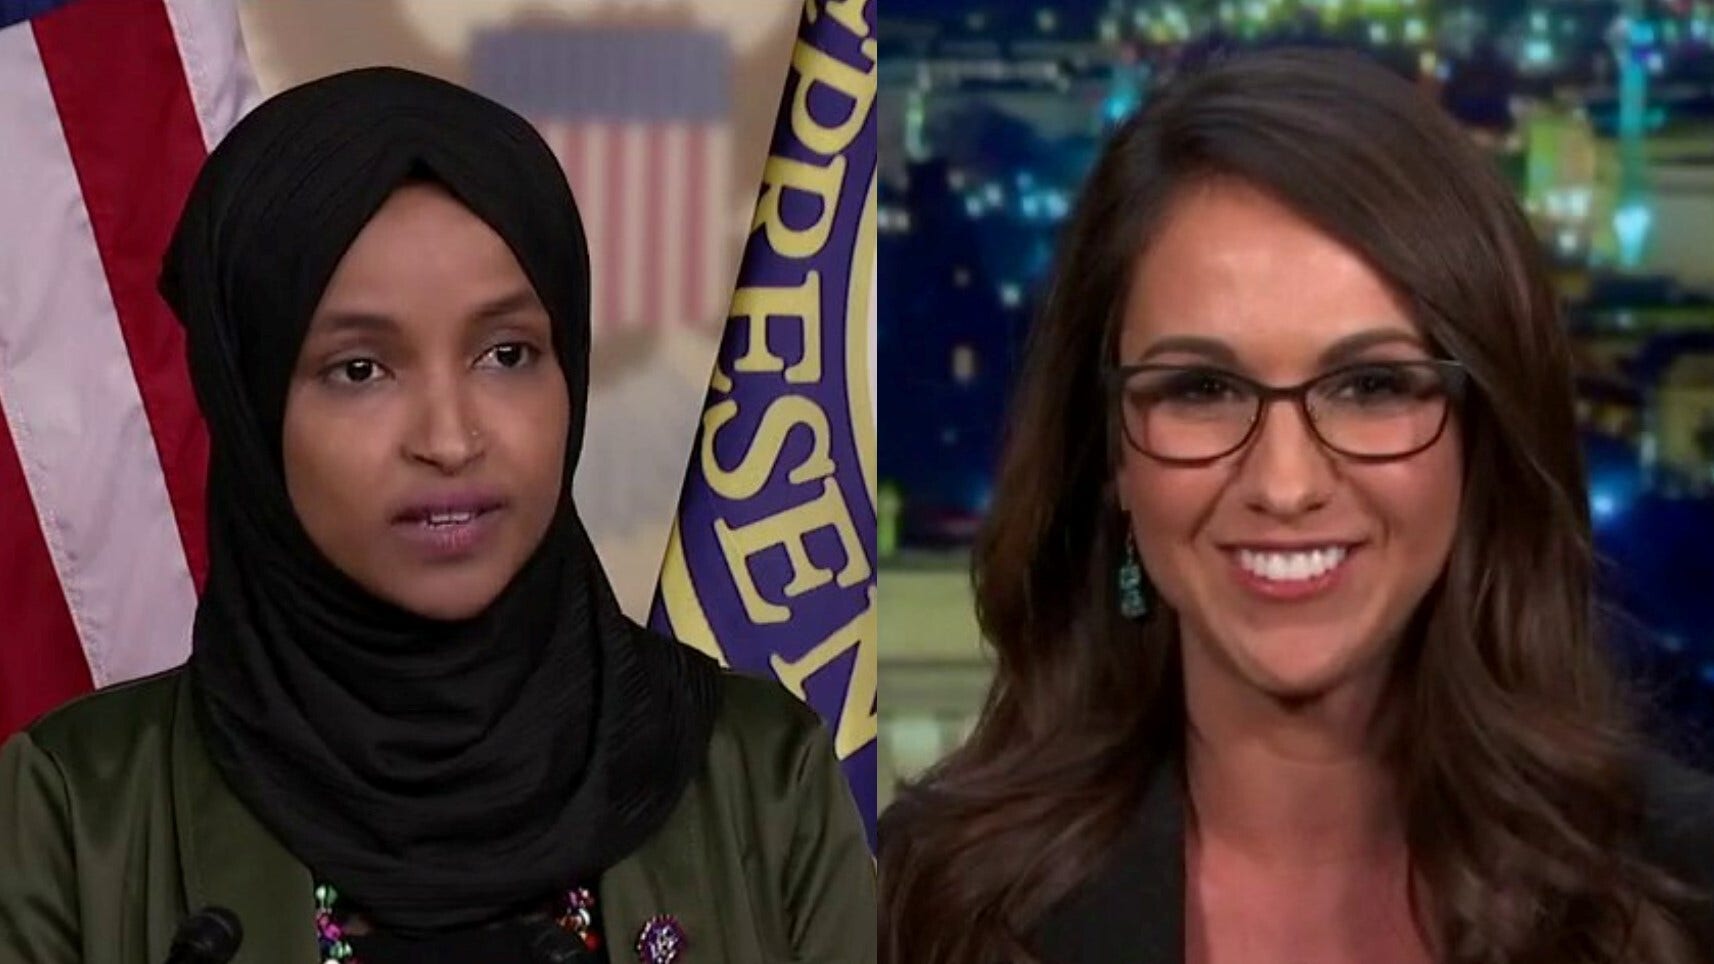 Lauren Boebert fights back after comments against Rep. Omar spark outrage: ‘I will not be canceled’